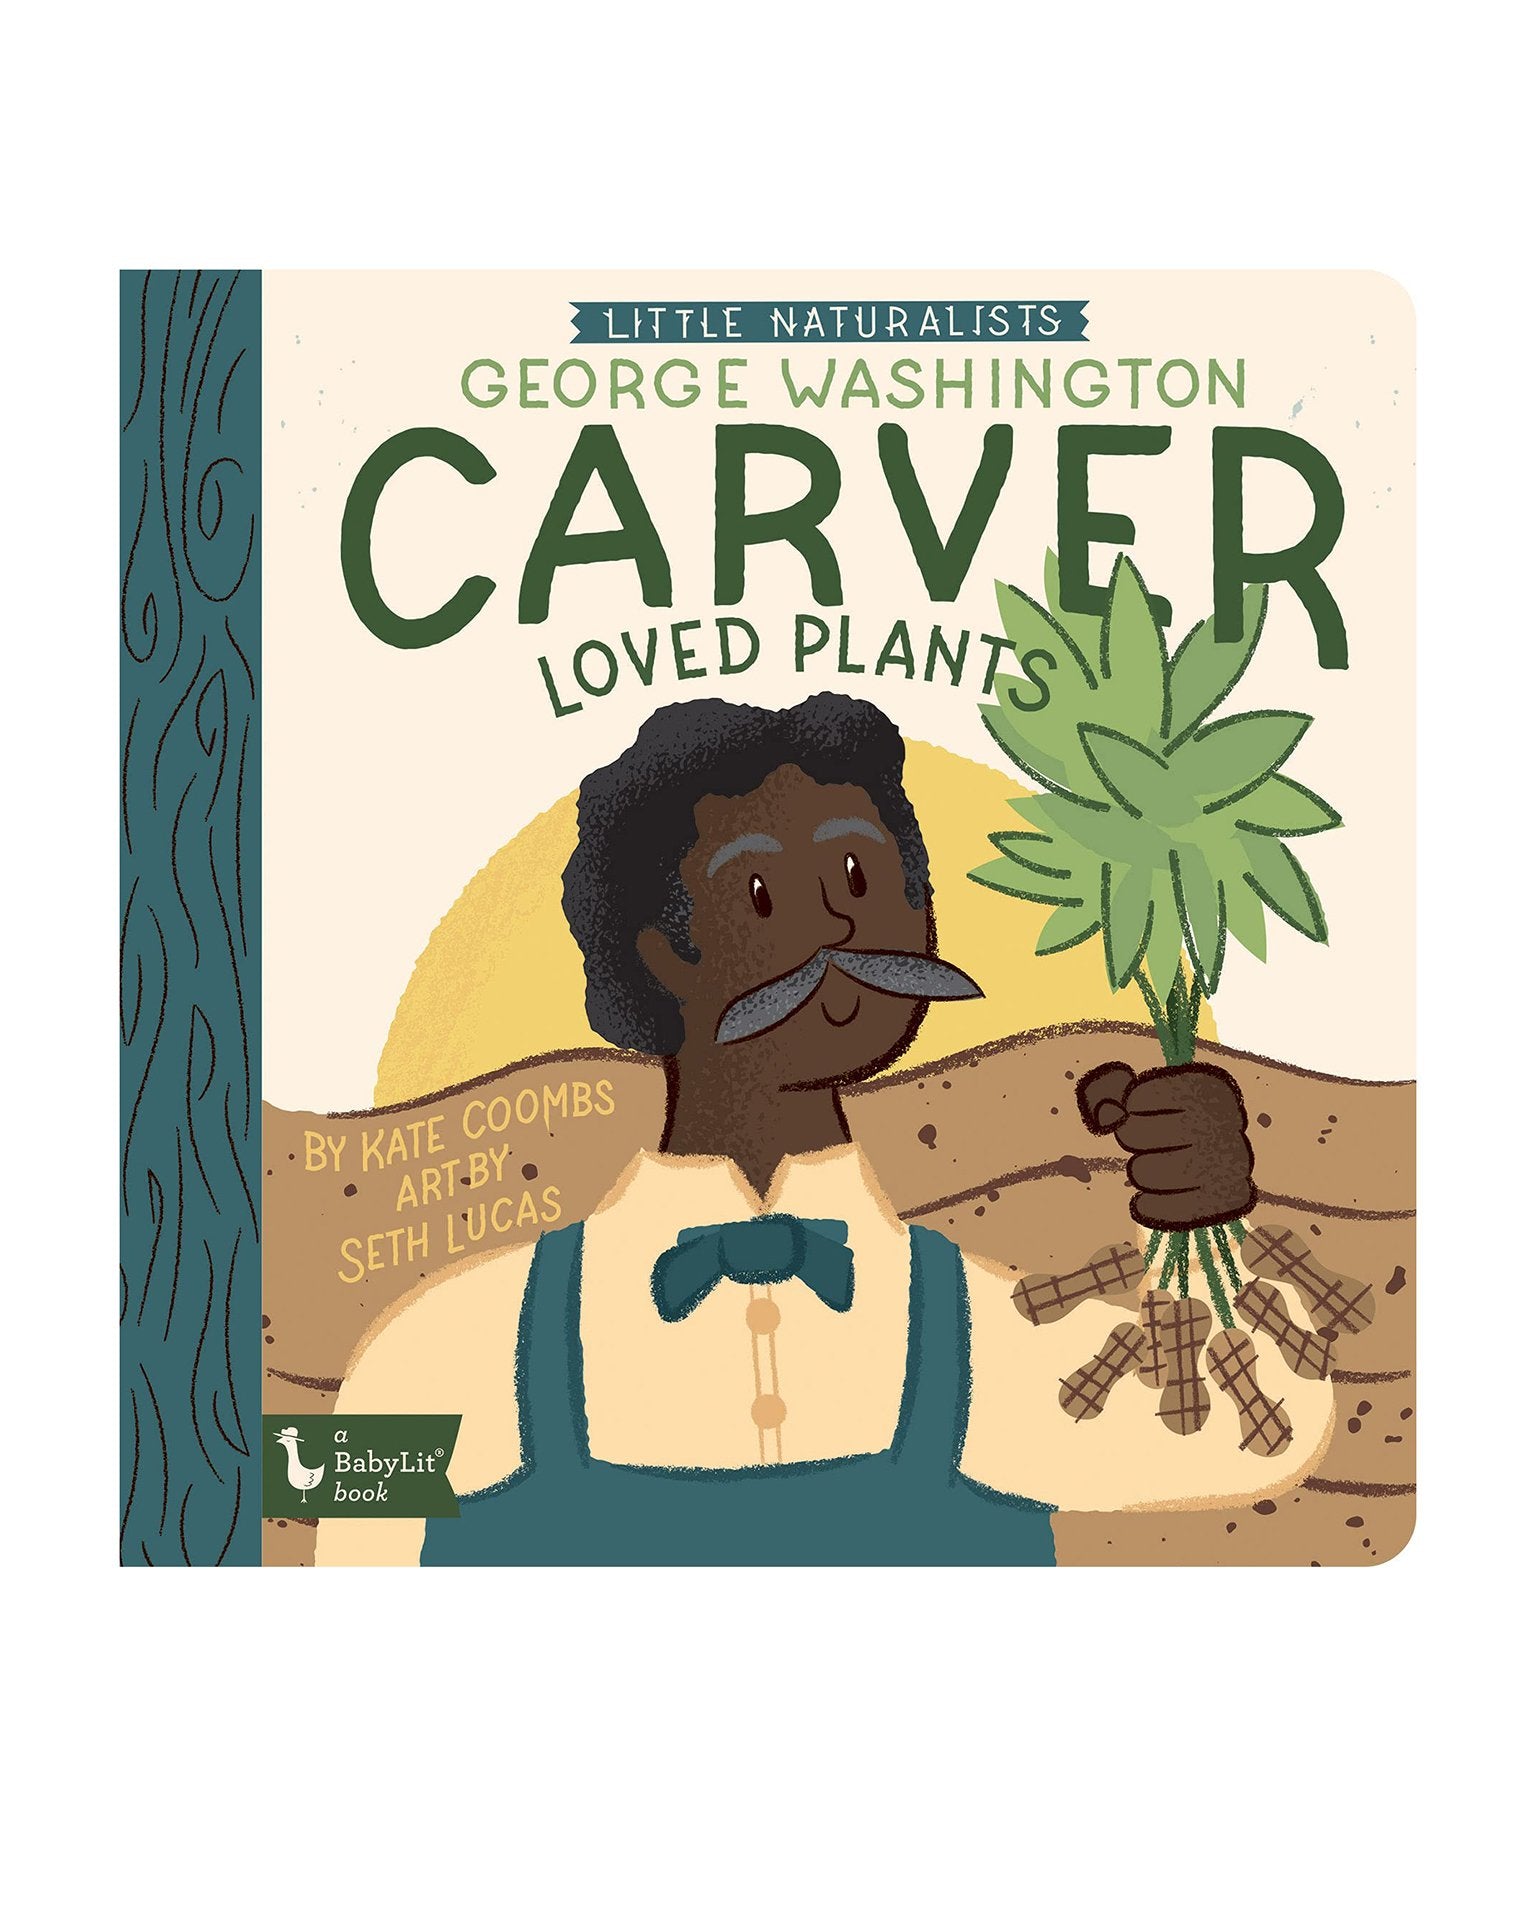 Little gibbs smith play little naturalists: george washington carver loved plants